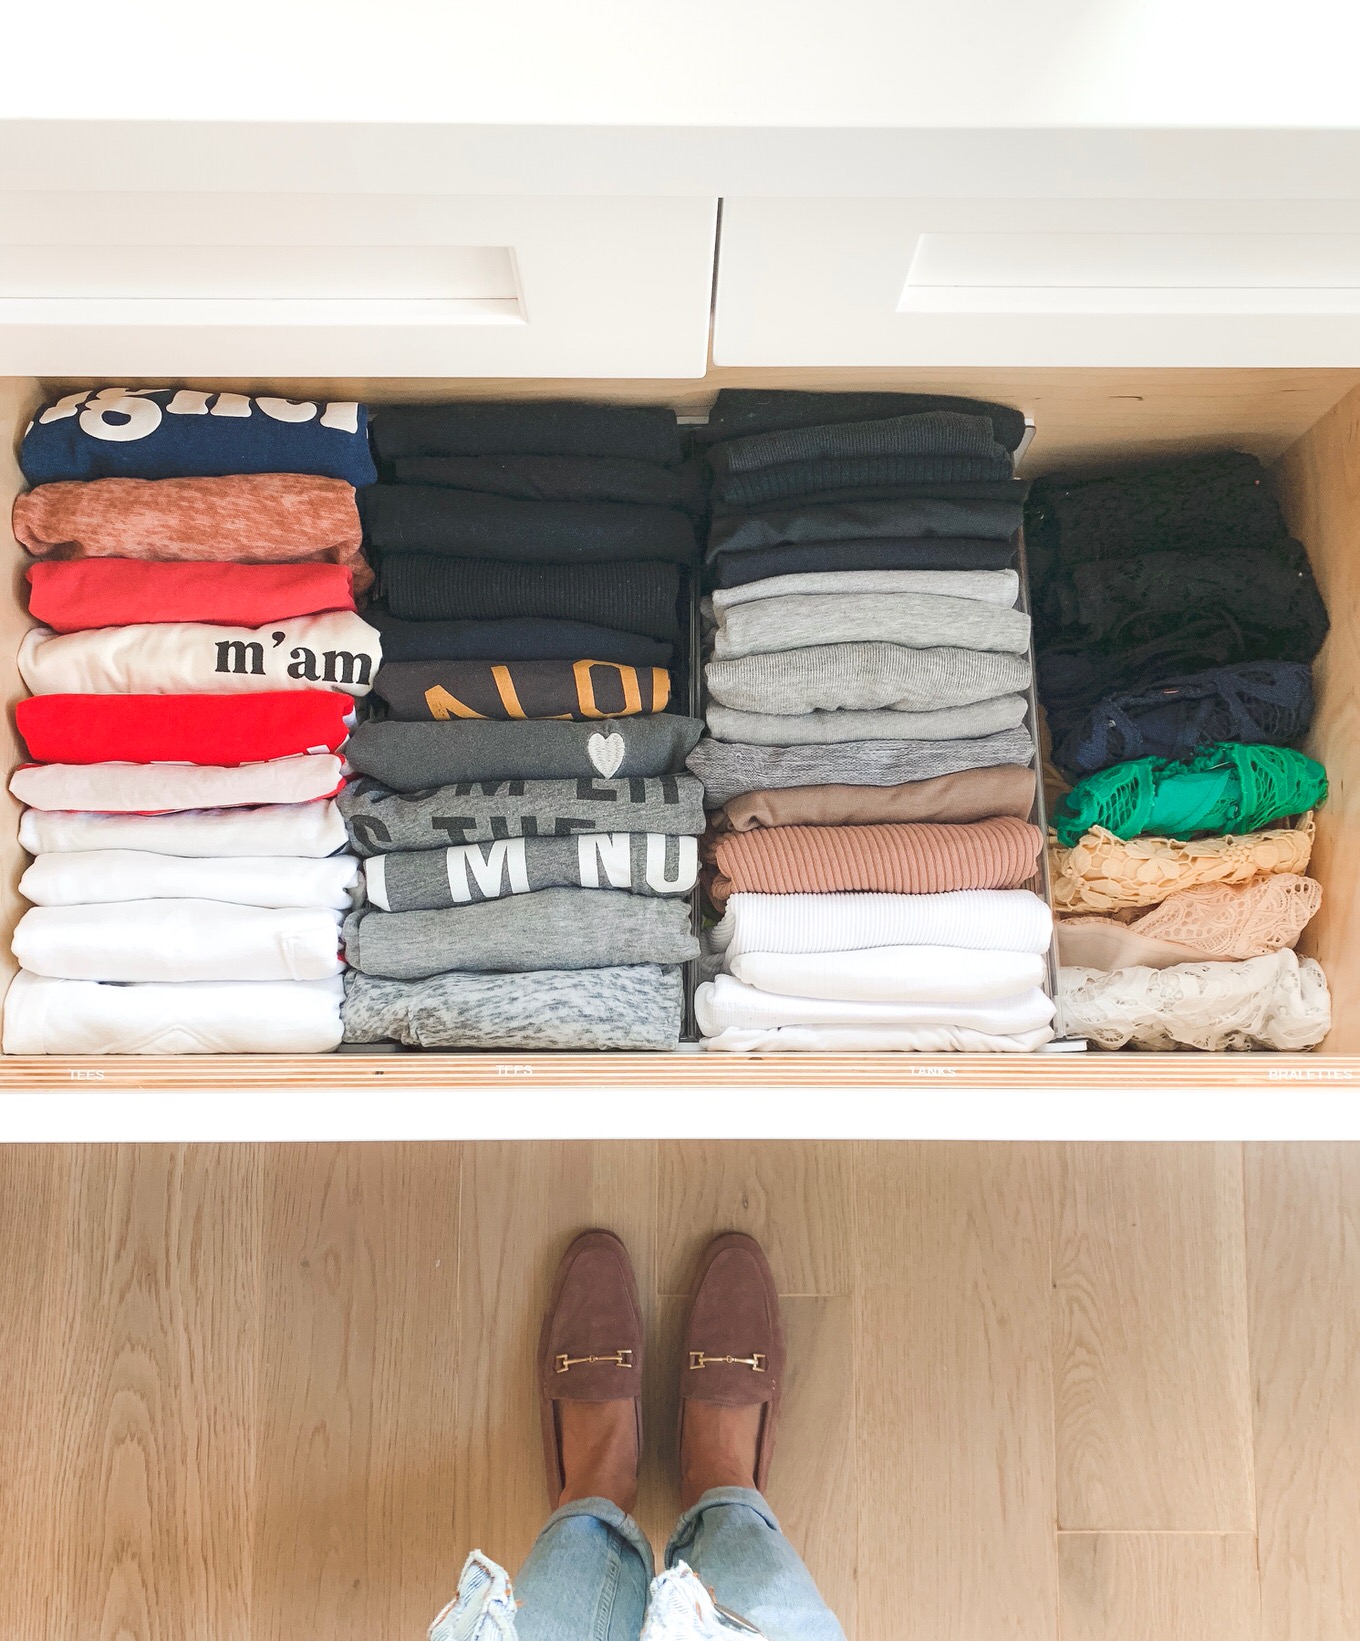 Tackle Your Closet Spring Cleaning with These 10 Easy Tips to Make